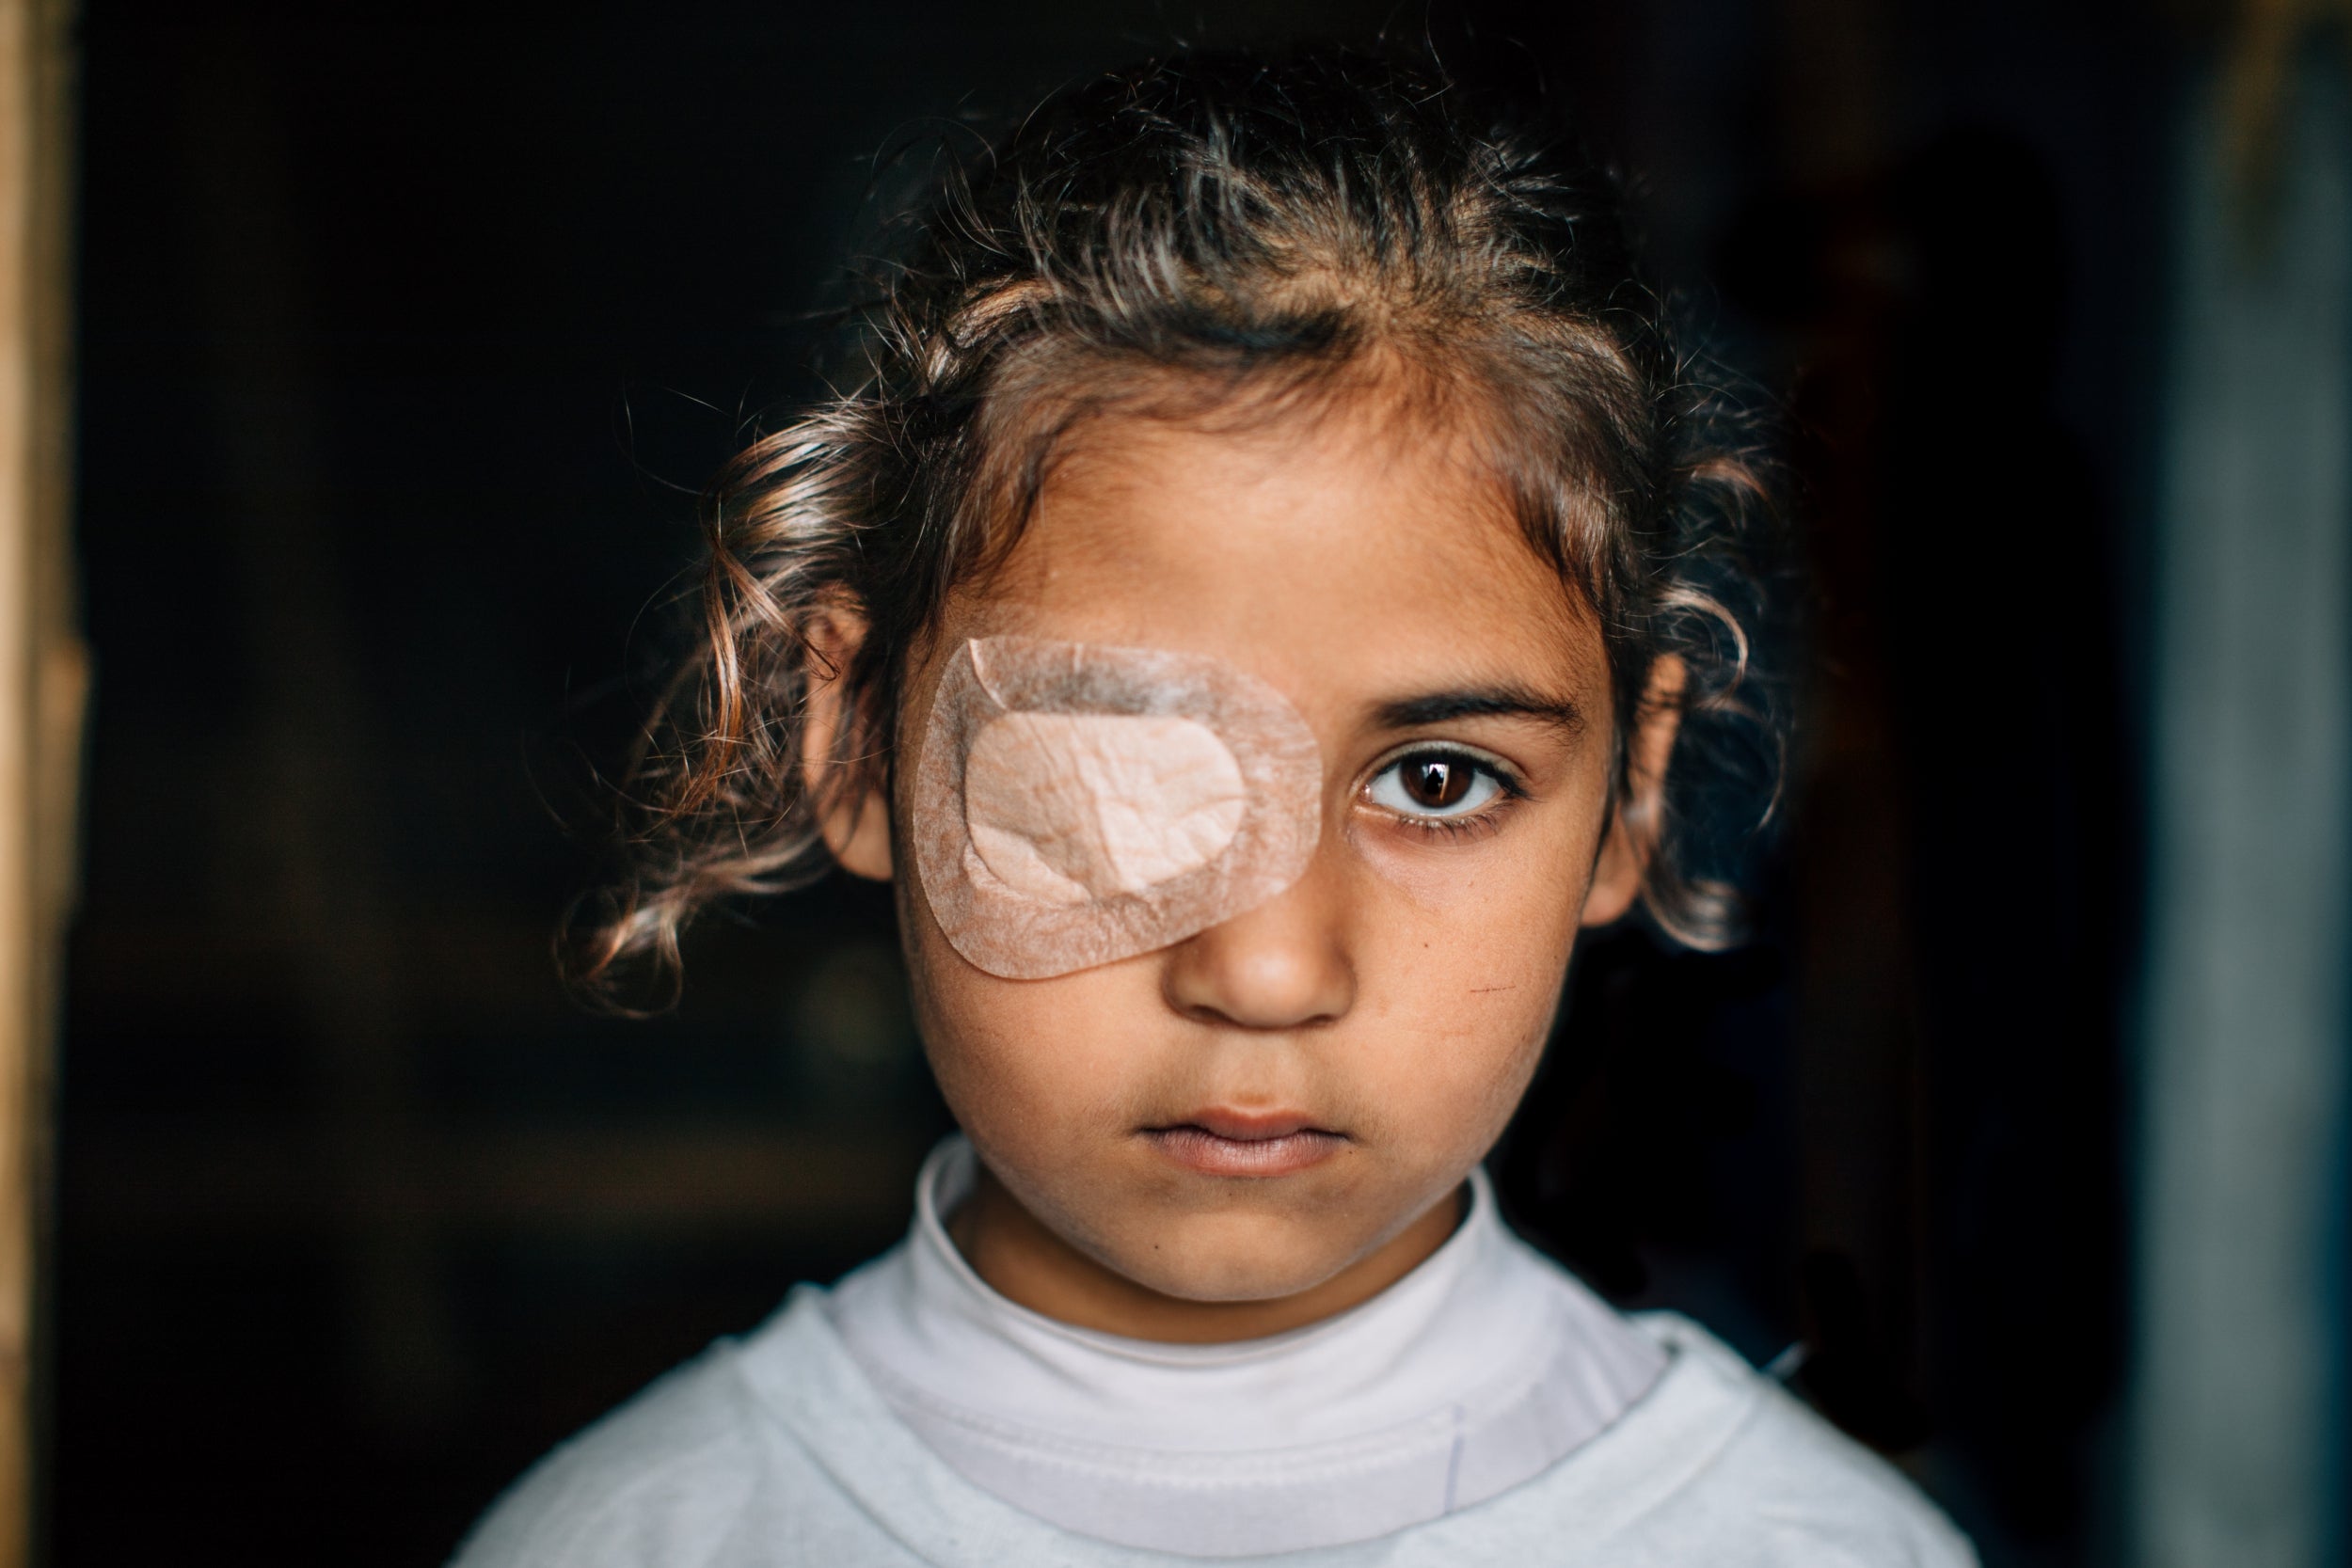 Qaram, 8, is in desperate need of an operation to save her sight